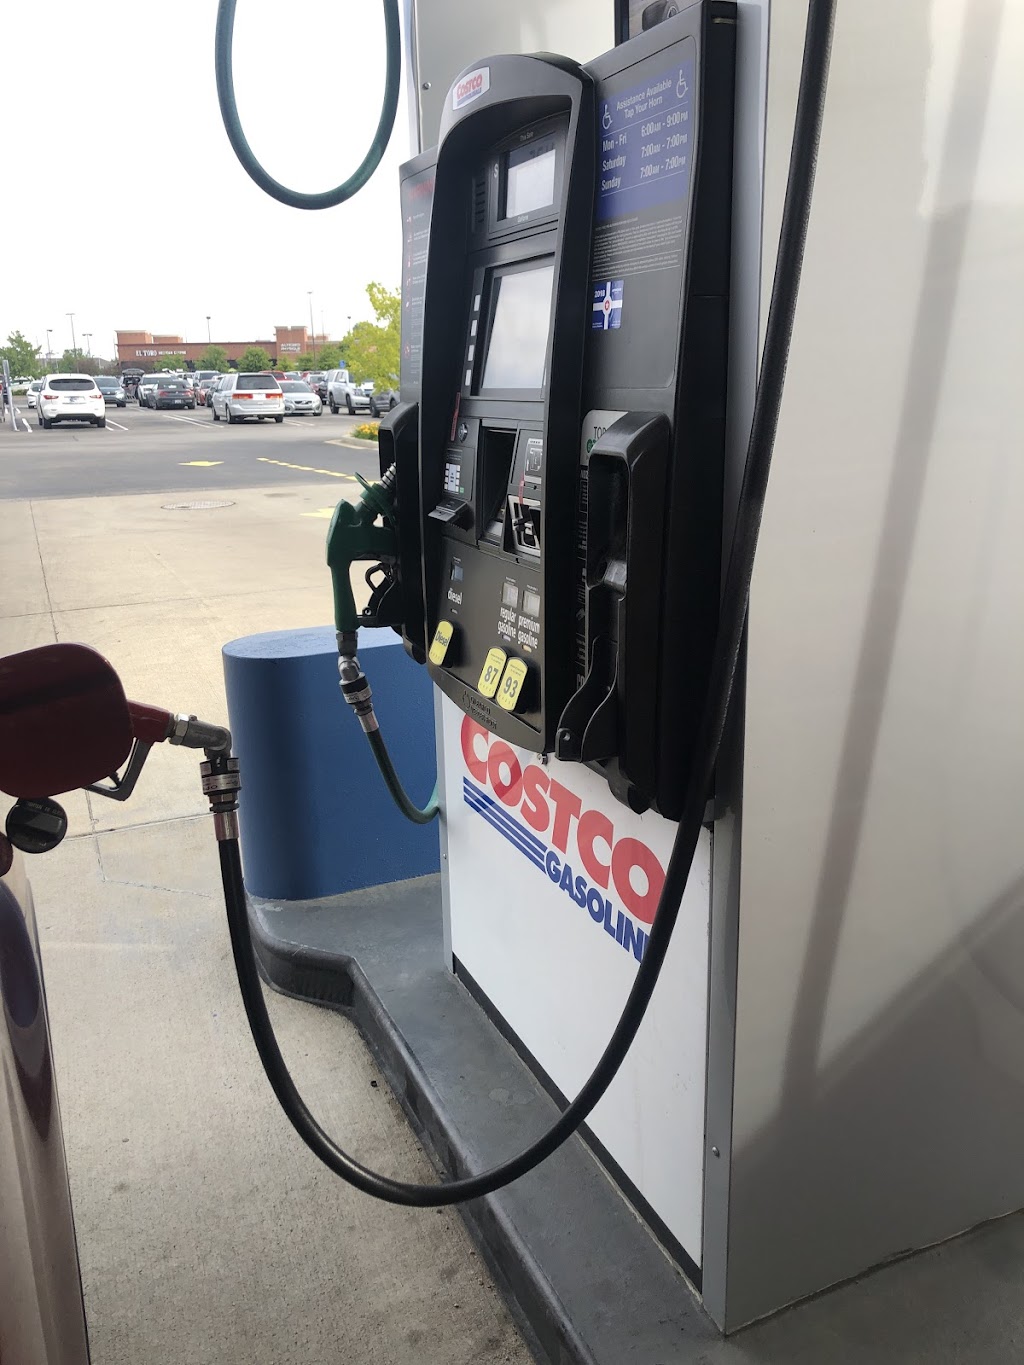 Costco Gas Station | 9010 Michigan Rd, Indianapolis, IN 46268, USA | Phone: (317) 532-1608